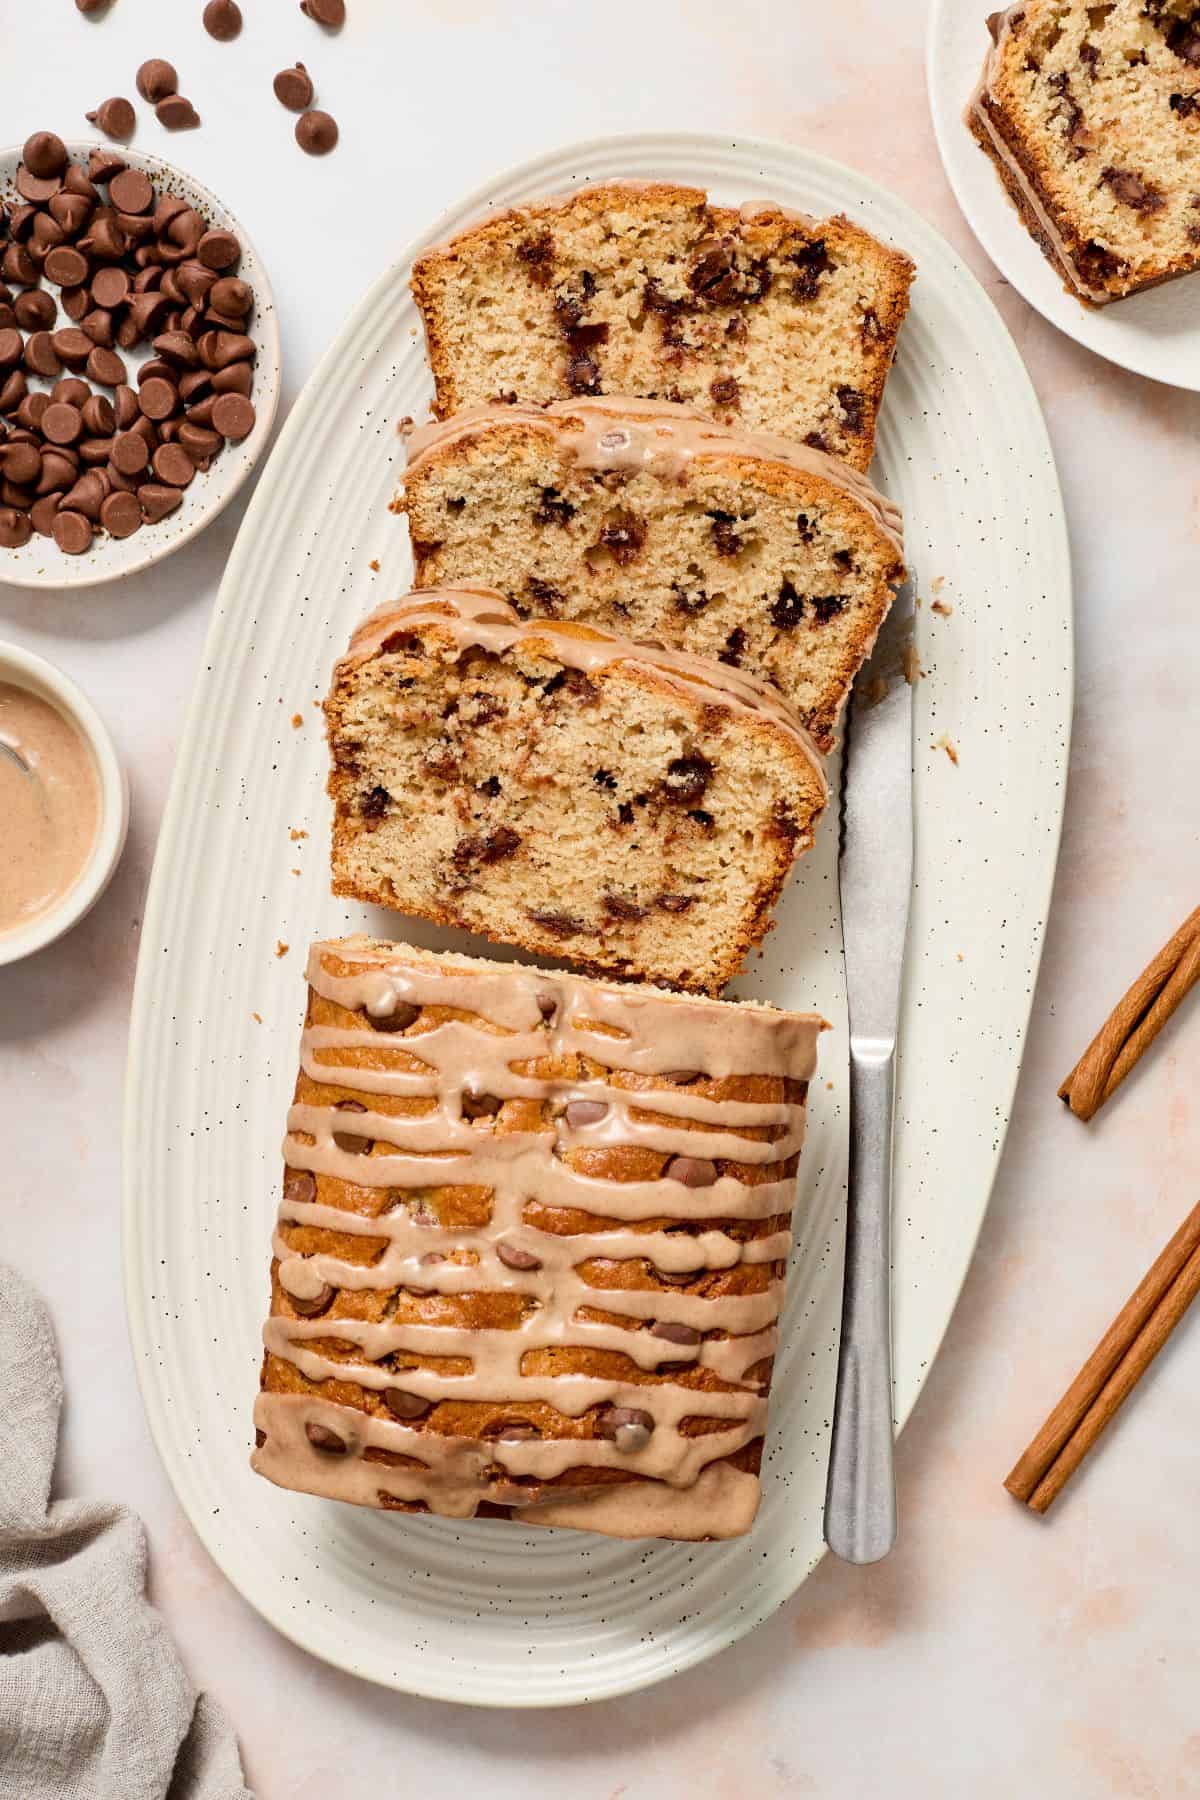 Cinnamon Chocolate Chip Loaf Cake, with four slices cut, sitting on a white oval platter, with a knife on the edge.